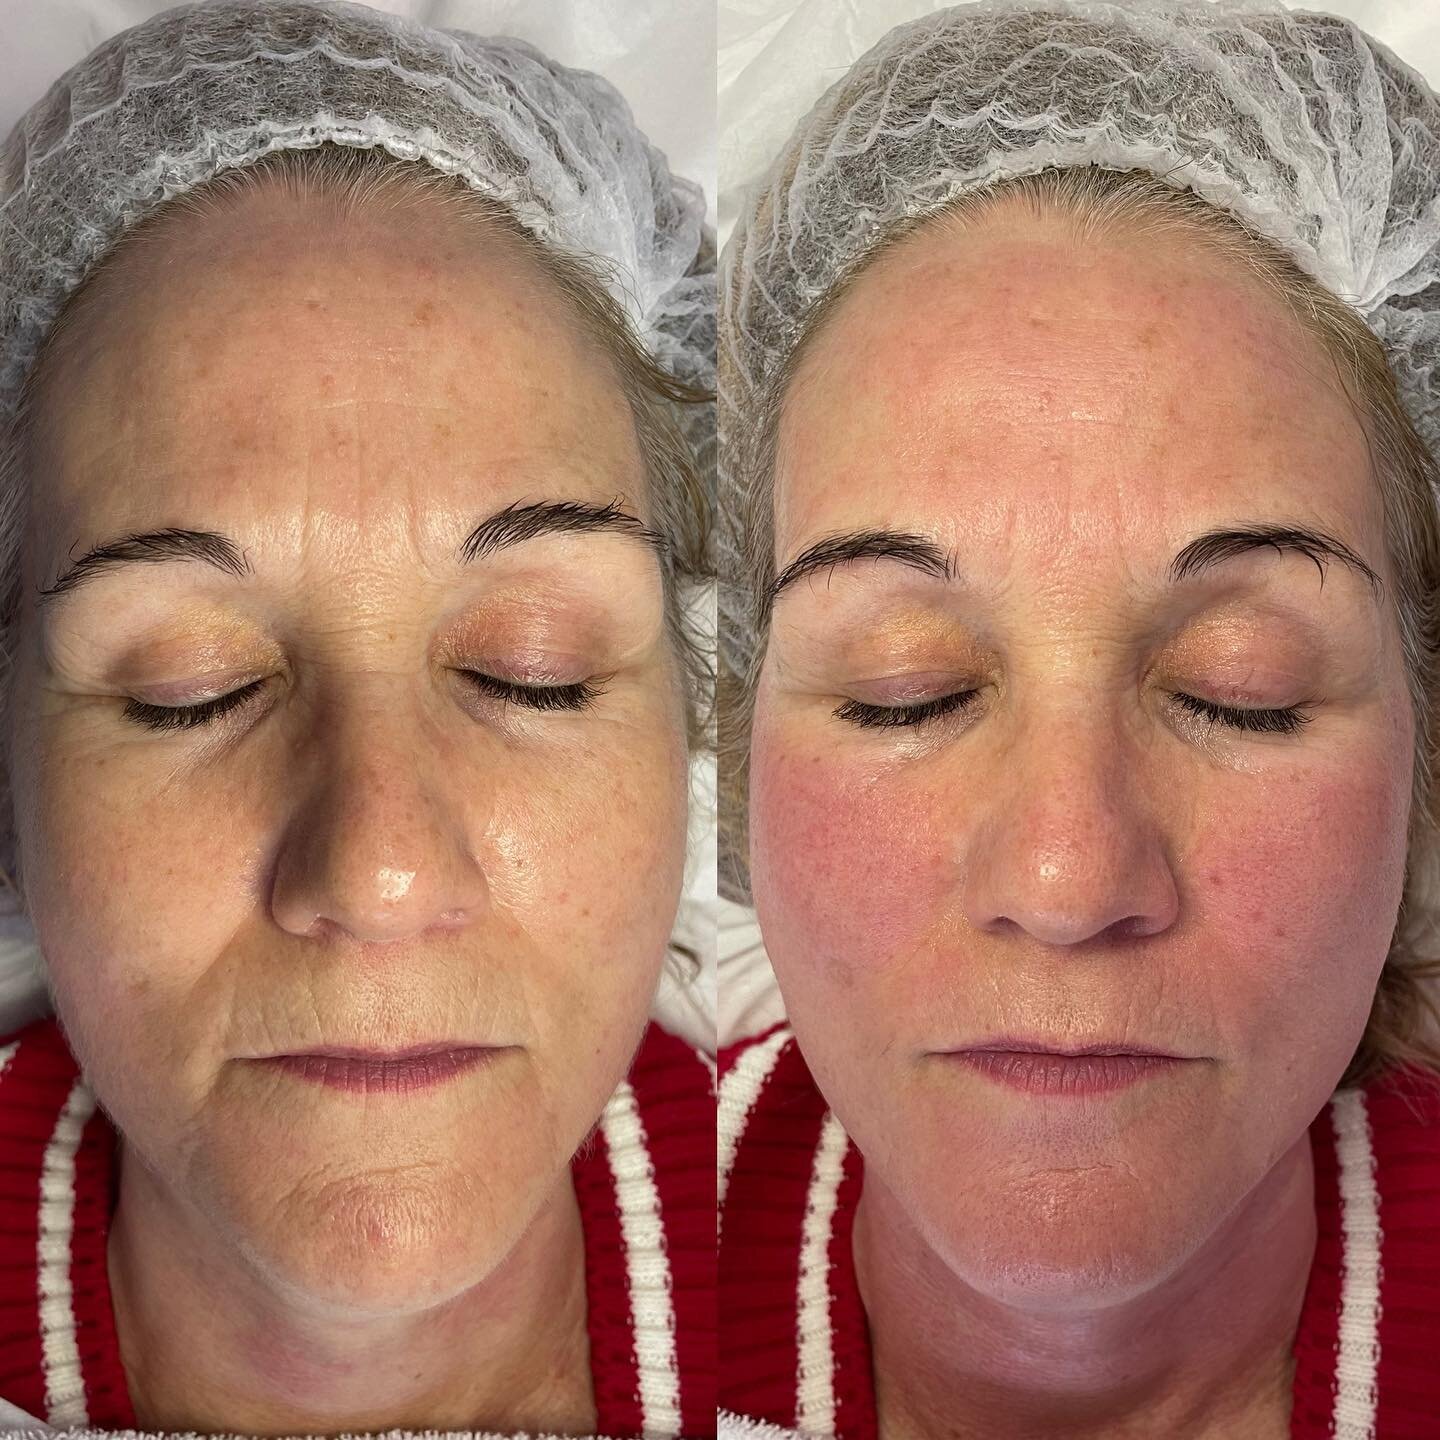 Radio Frequency Micro-needling✔️

Wow theses Results after only one treatment!

Radio Frequency Micro-needling device, which is has been shown to be clinically effective in the treatment of anti-ageing concerns, scar reduction and in the treatment of